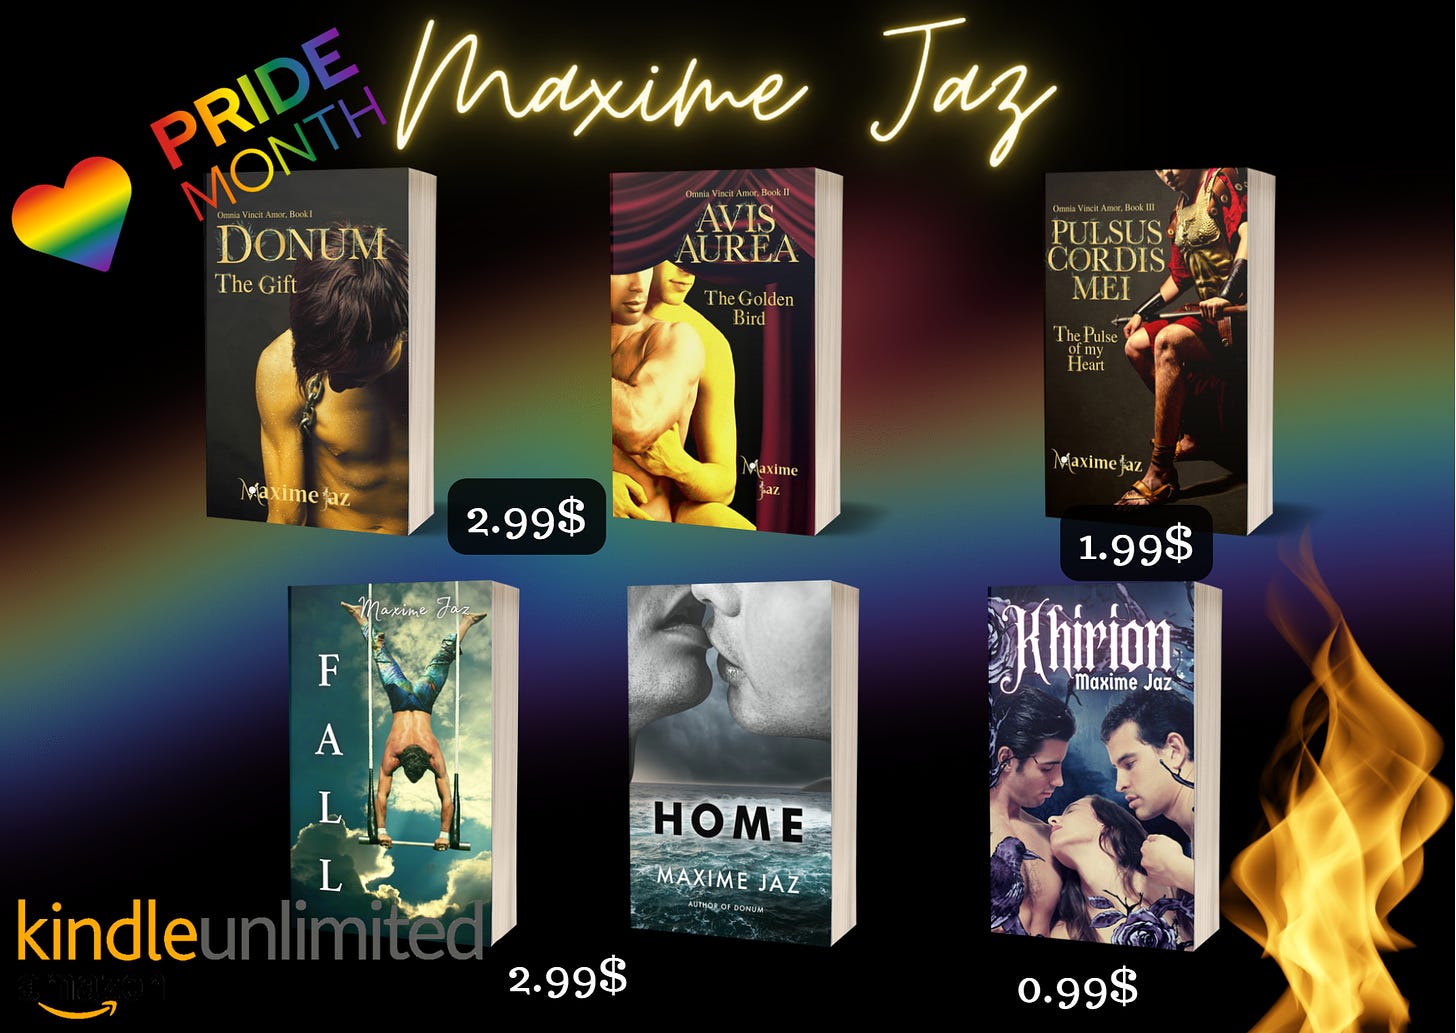 Black background with a soft rainbow across Top in yellow glowing handwritten font Maxime Jaz to the left in rainbow colors a heart and Pride mont h written  From left to right mockups of the books: Omnia Vincit trilogy Book 1,2,3 Donum, a young man half-naked head lowered, golden skin. Avis Aurea, two men half-naked, one embracing the other from the back. Pulsus Cordis Mei a Roman general sitting in his armor. Fall- an acrobat doing a handstand on a trapeze swing.  Home- two men’s lips locking on top, in greyscale, a storm in the background and a frothy sea under their faces. Khirion- Title in white glowing gothic font Khirion, under it the author's name Maxime Jaz. The frame is black roses on vines and a raven sitting on the left bottom corner. There are three characters in the middle, naked, they are only visible to the shoulders, and chest for the left one. Two men framing a woman. Ku logo bottom left a flame bottom right